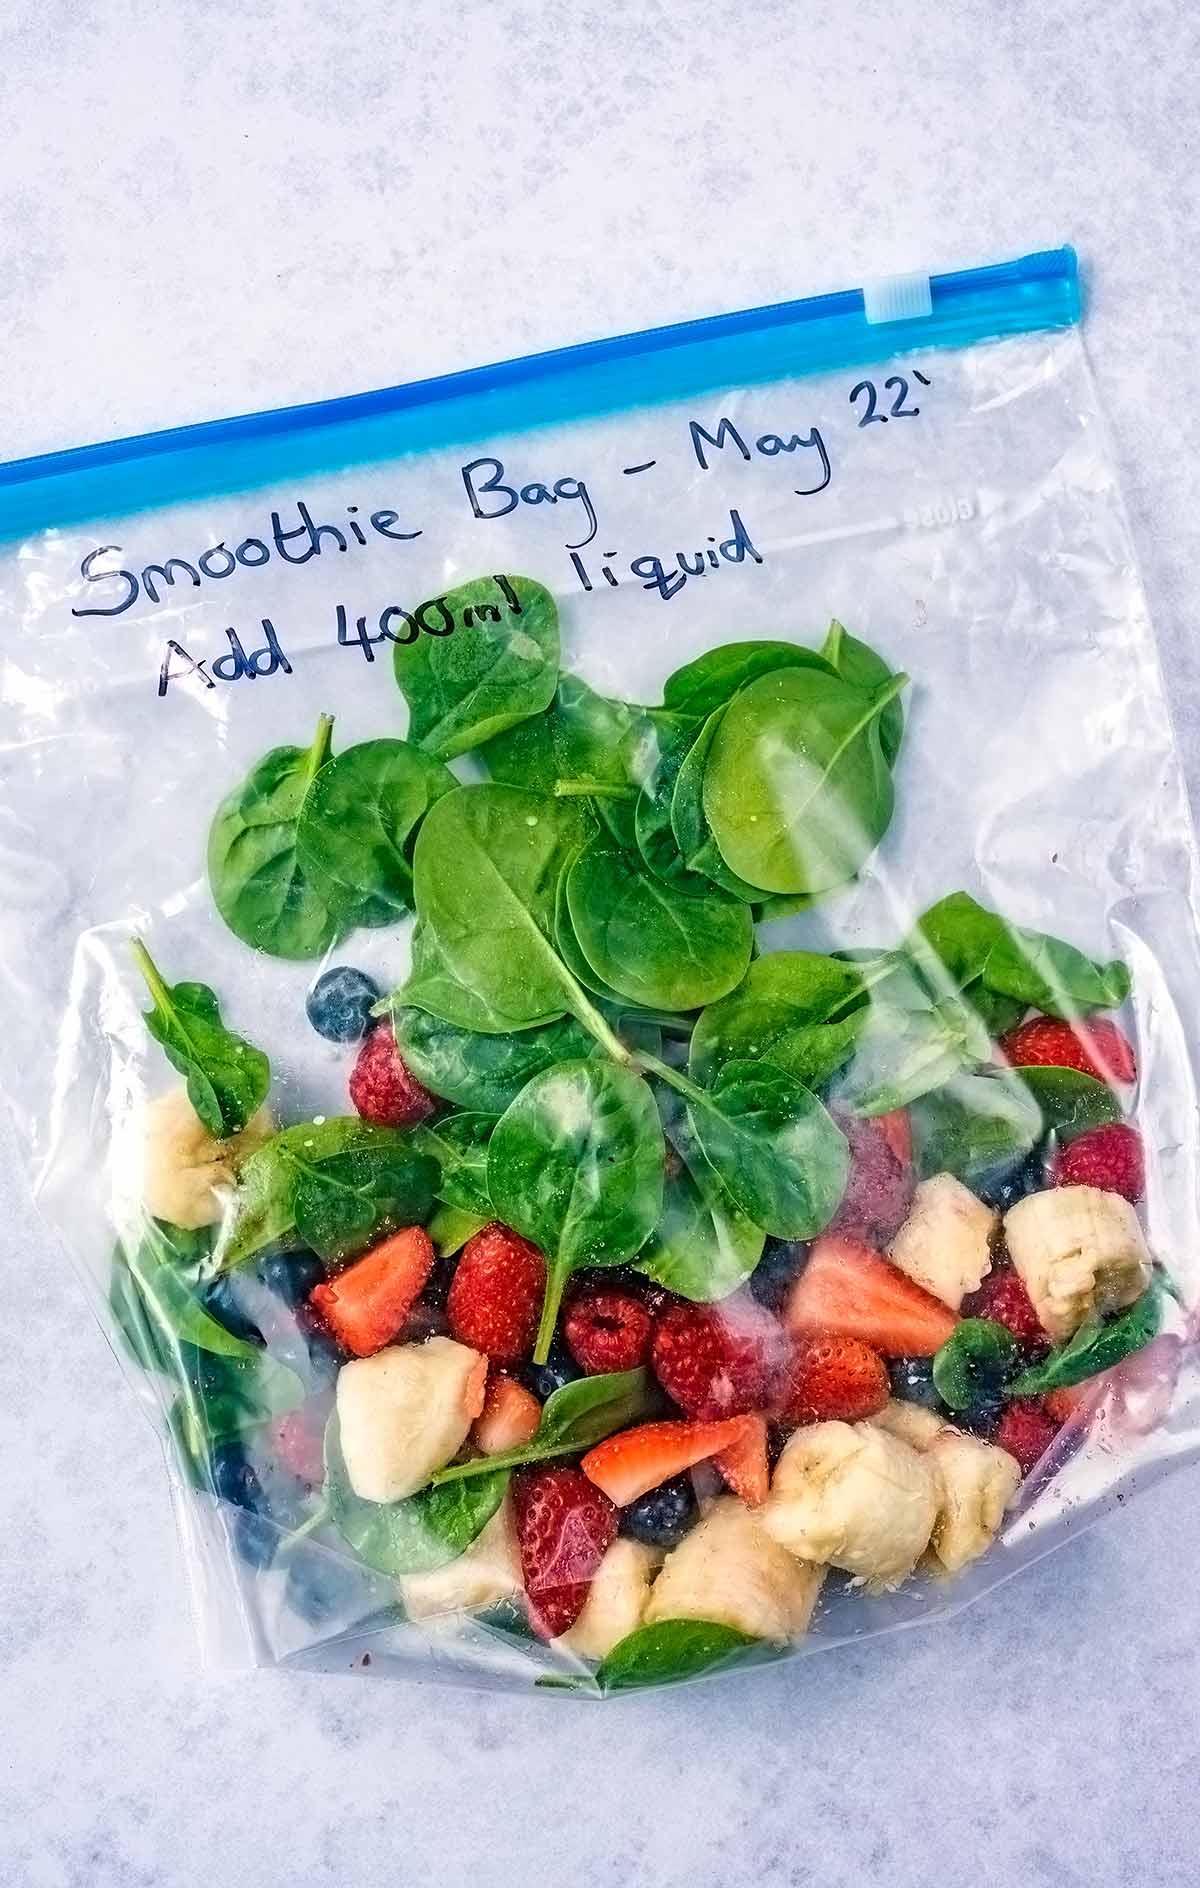 Banana, spinach and berries in a labeled ziploc bag.